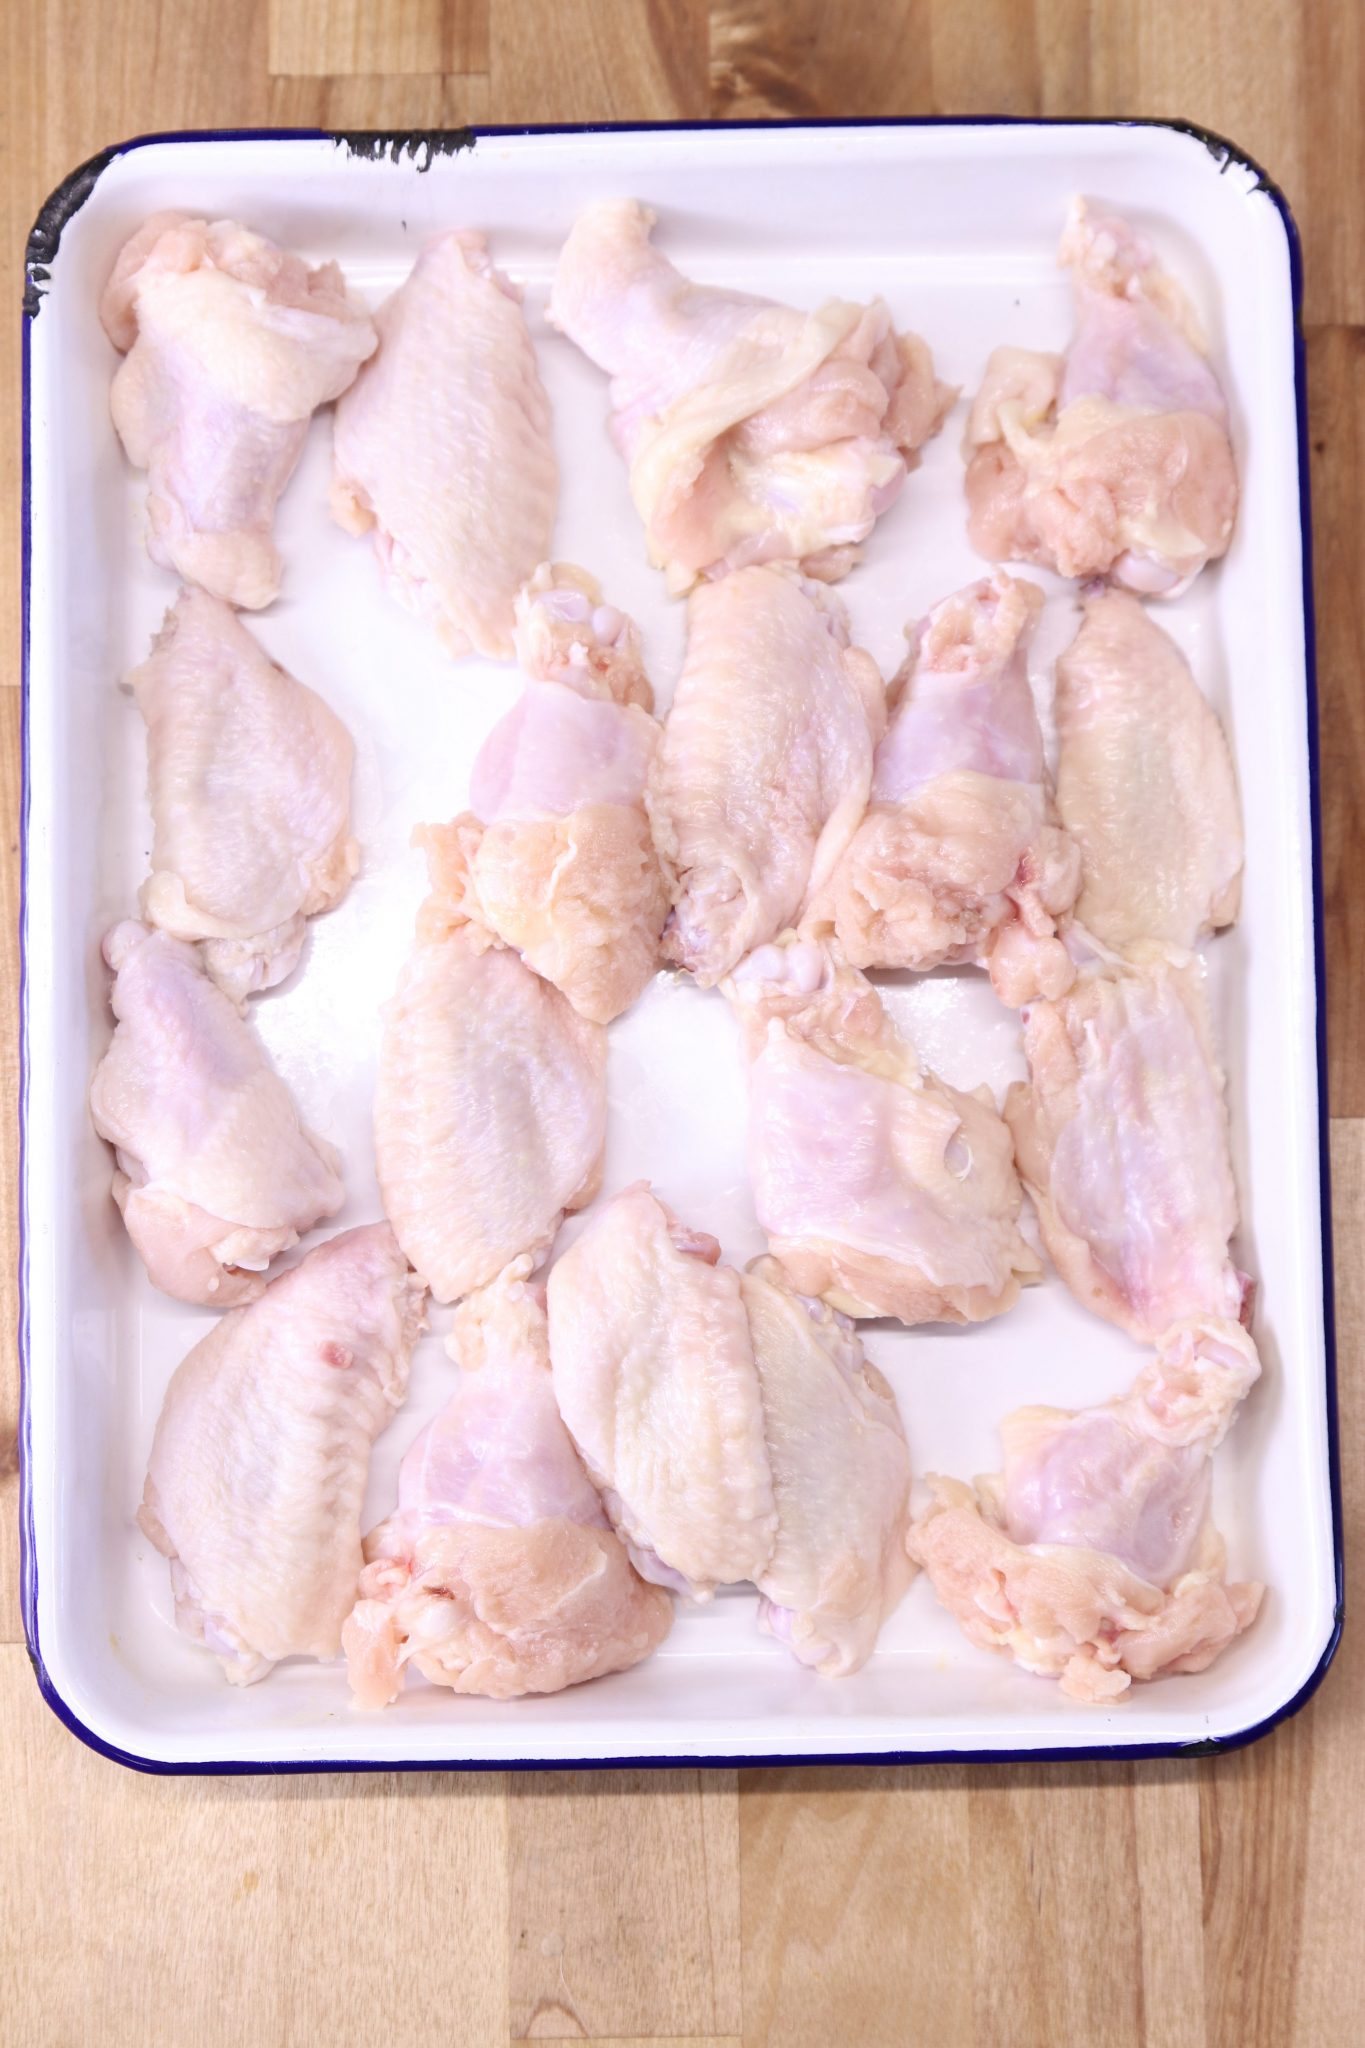 tray of uncooked chicken wings